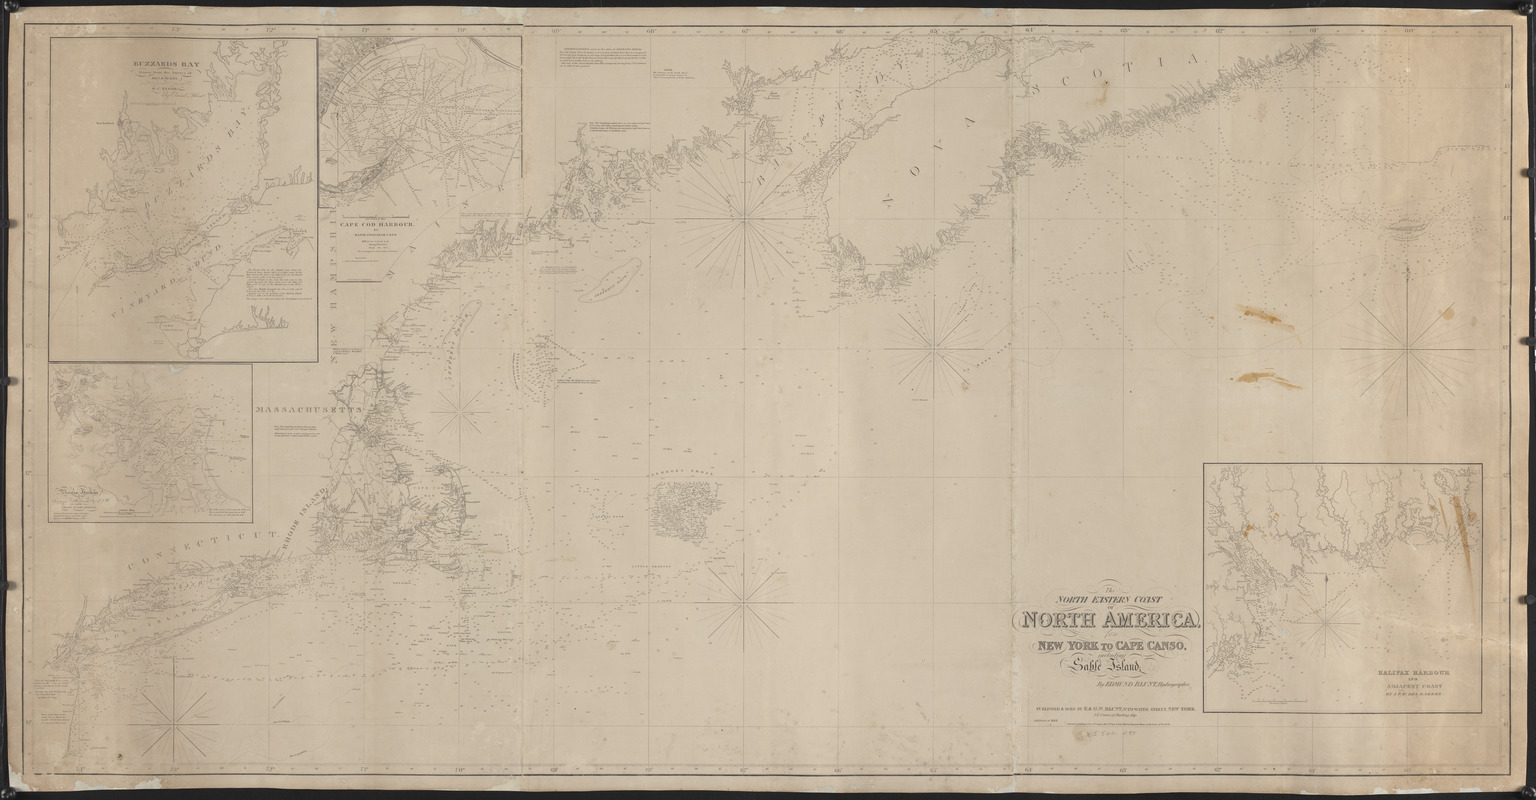 The north eastern coast of North America, New York to Cape Canso, including Sable Island